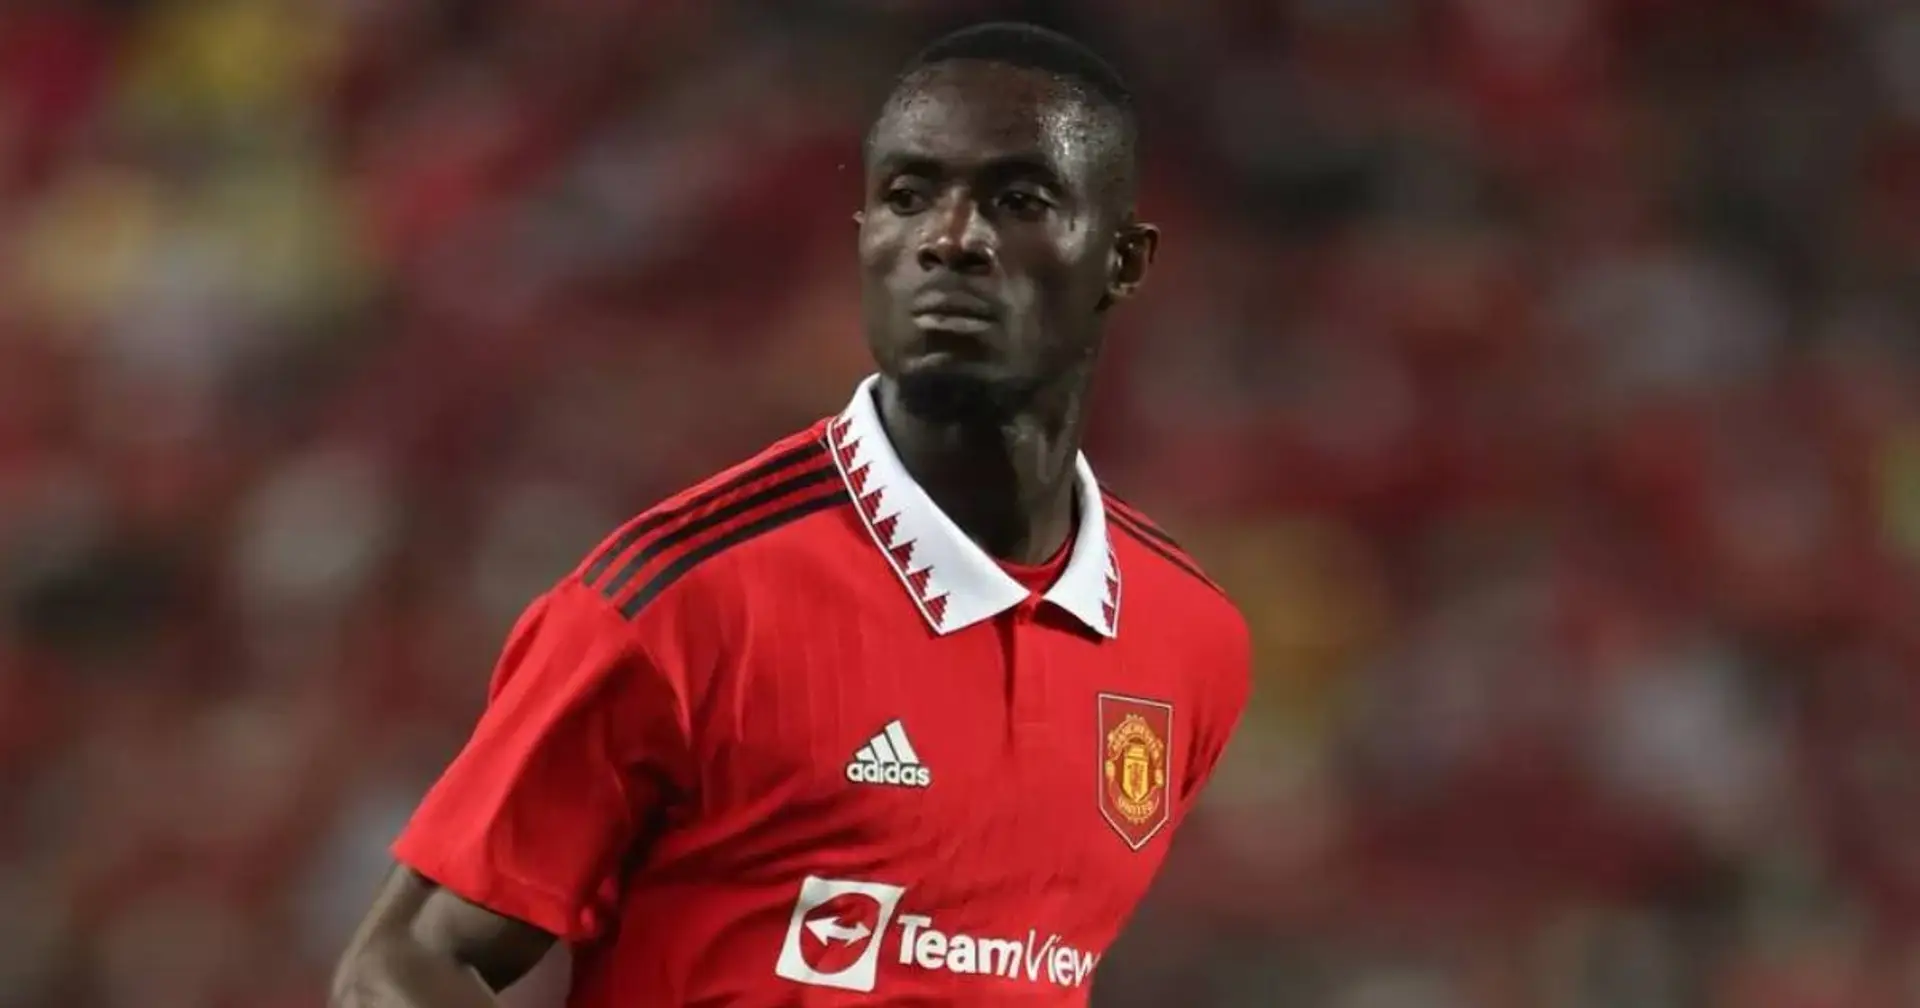 Man United desperate to offload Bailly, could sell him 'free of charge'